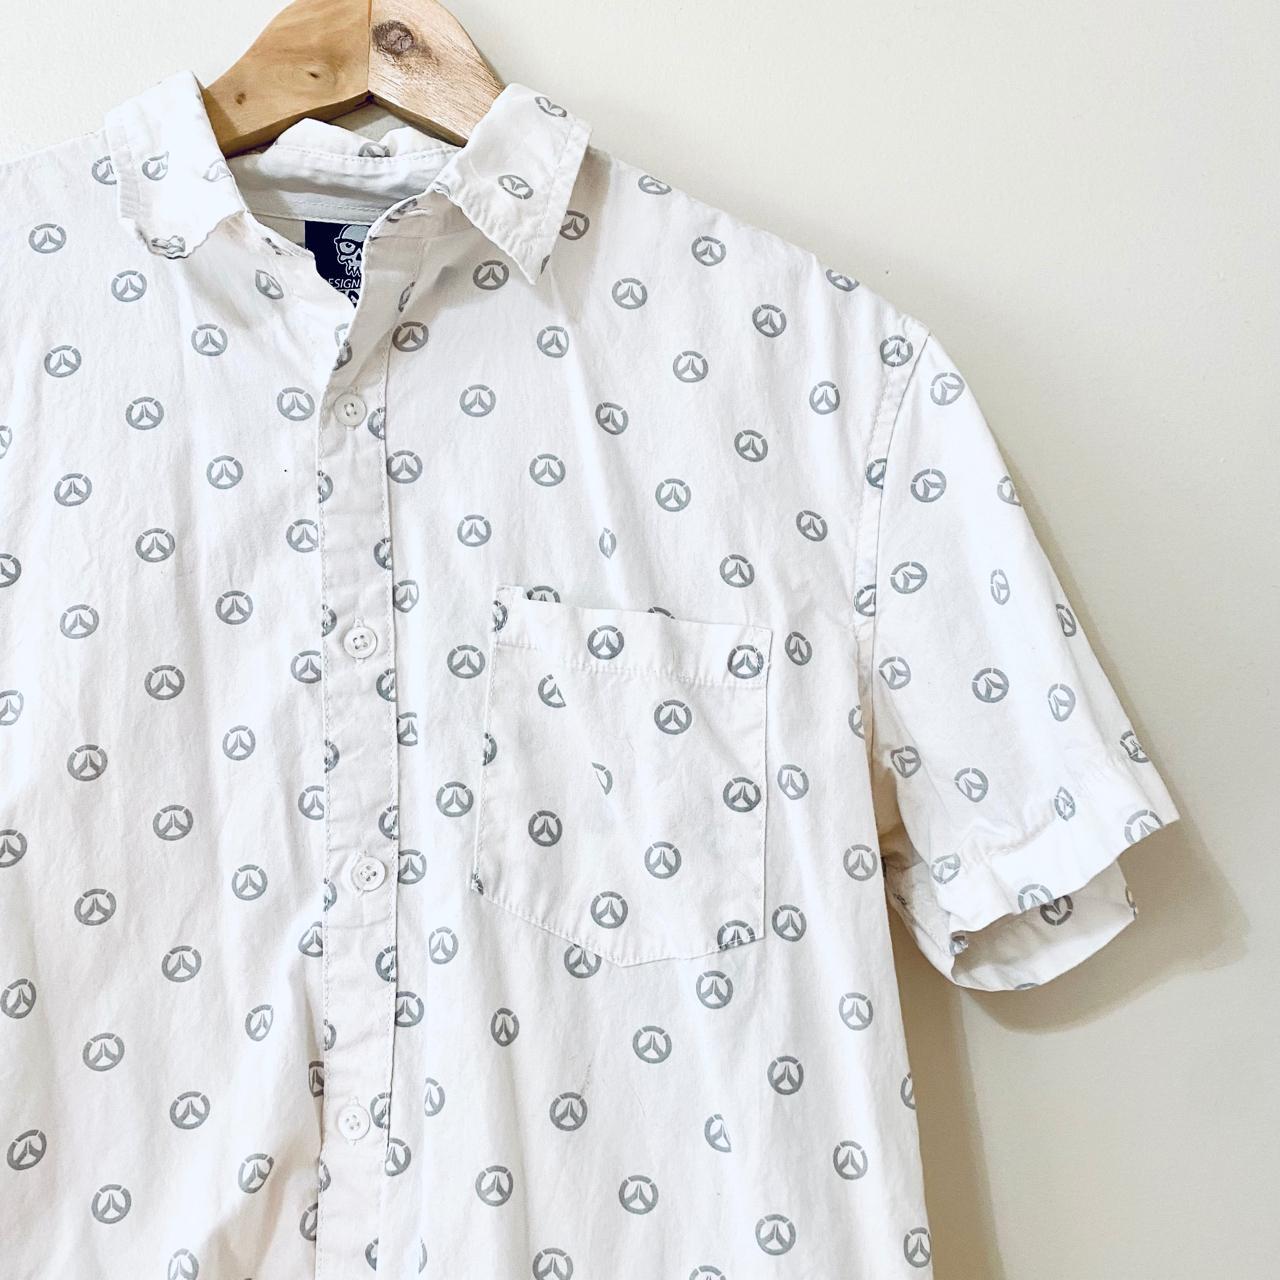 Product Image 2 - Overwatch Icon Button Down Shirt.